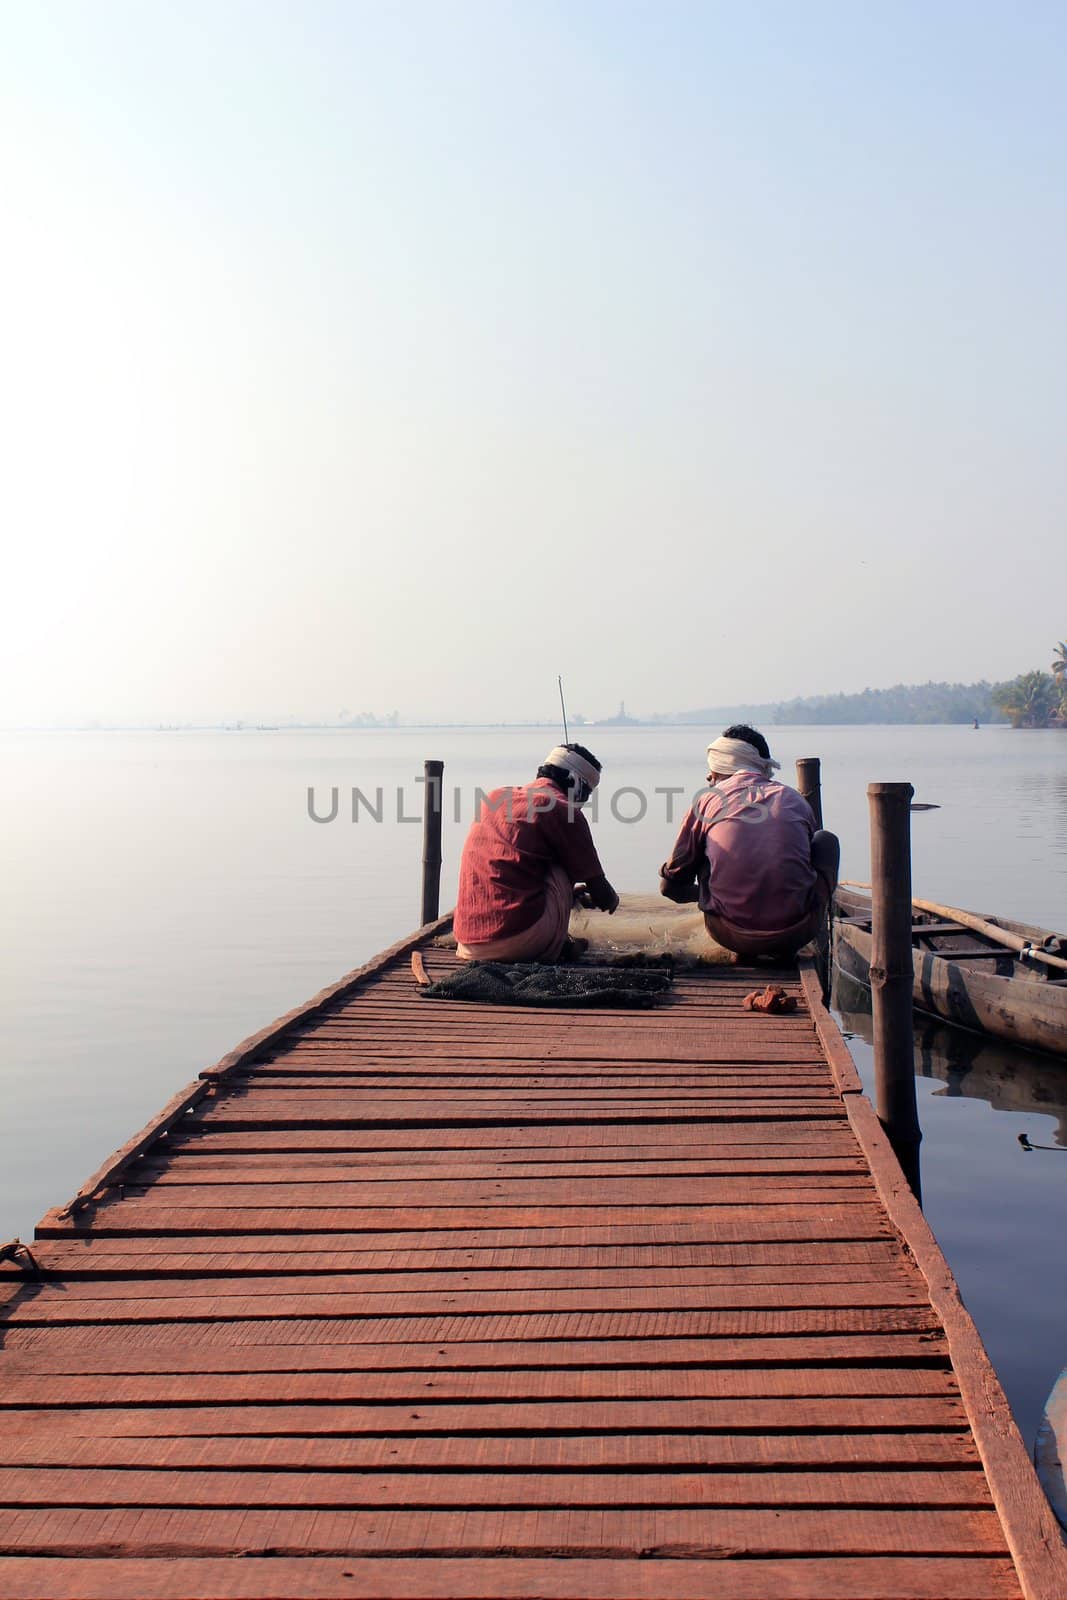 Fishermen sitting on a wooden platform with the fish catch in early moning near cherai village at kochi, kerala, India